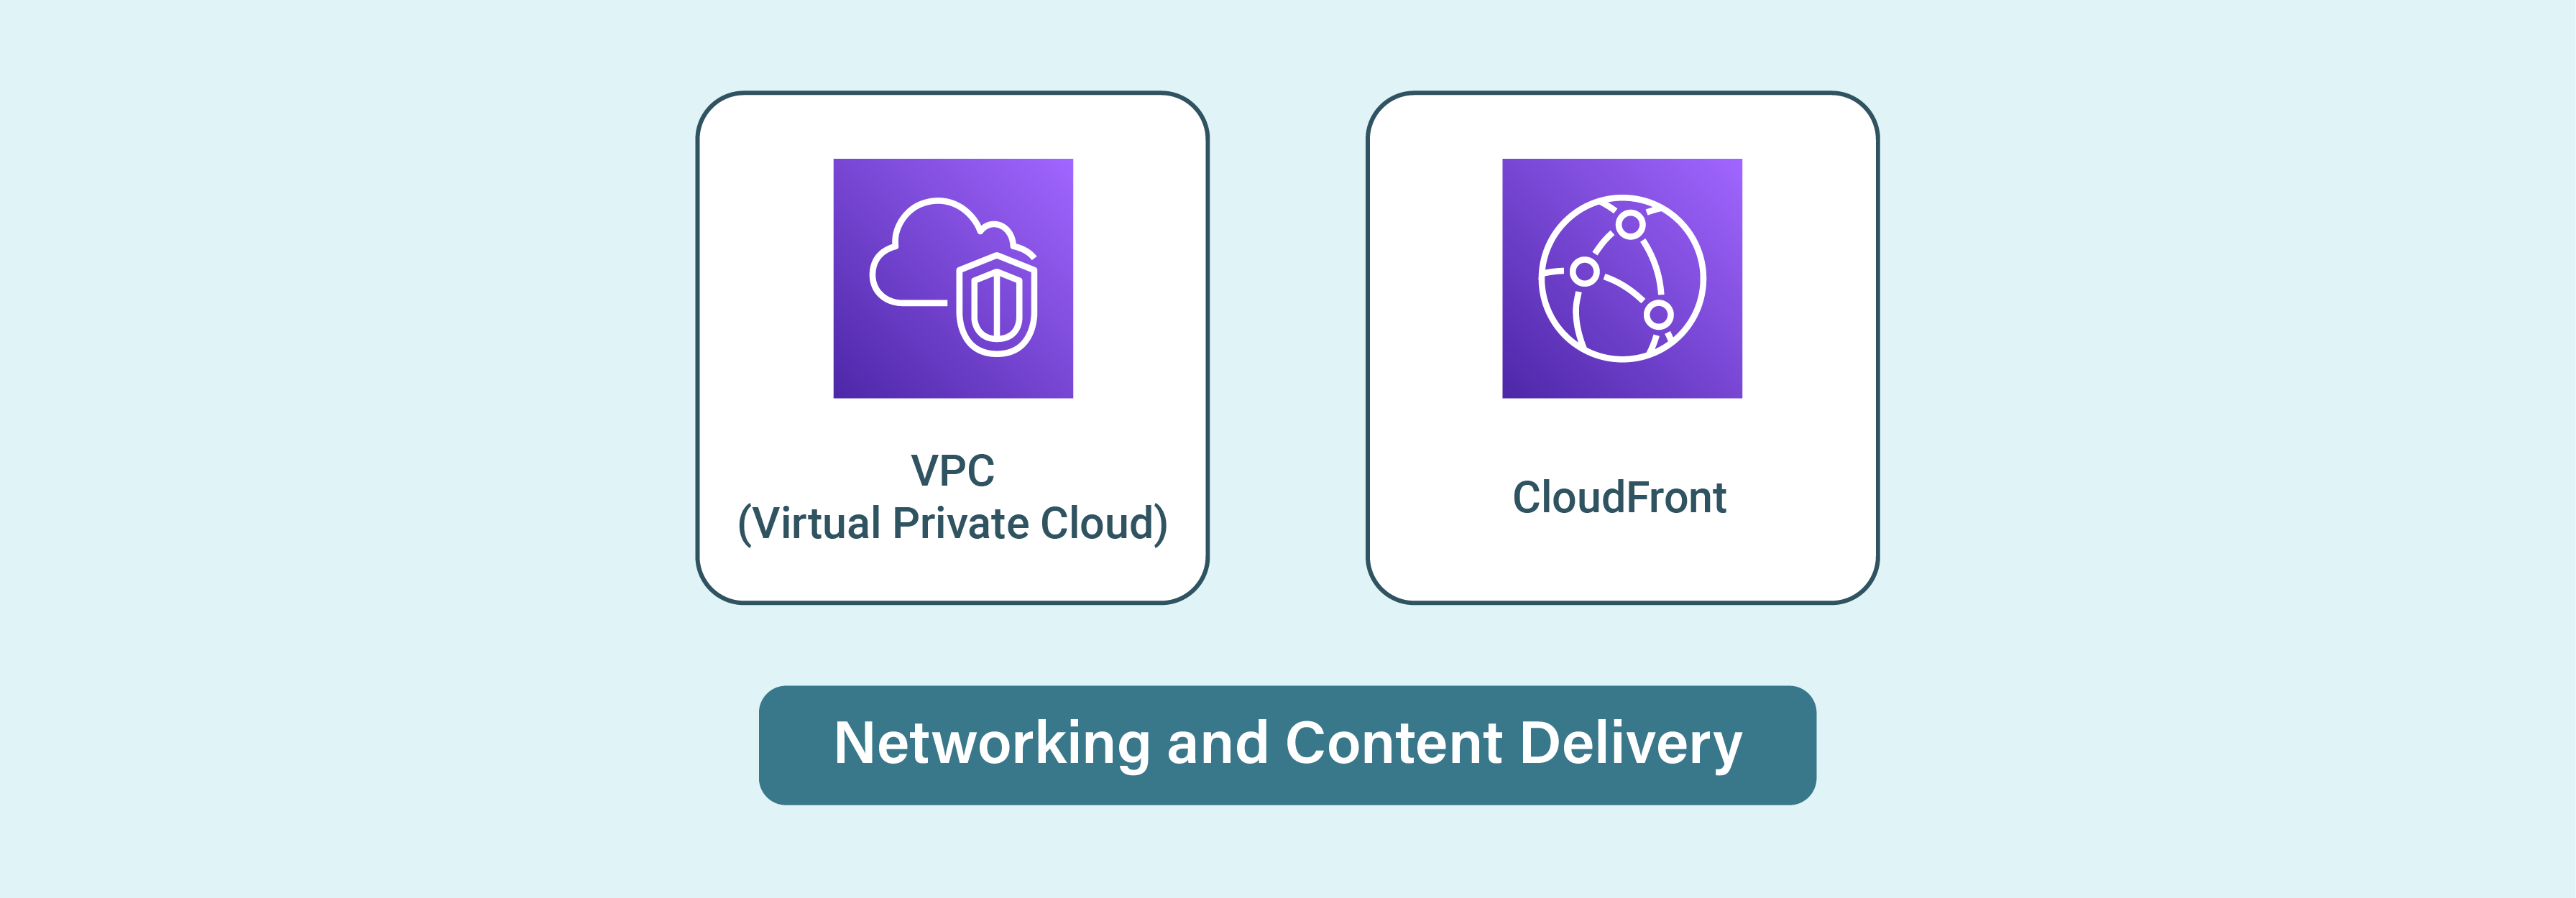 Networking and Content Delivery in Managed Magento AWS Hosting